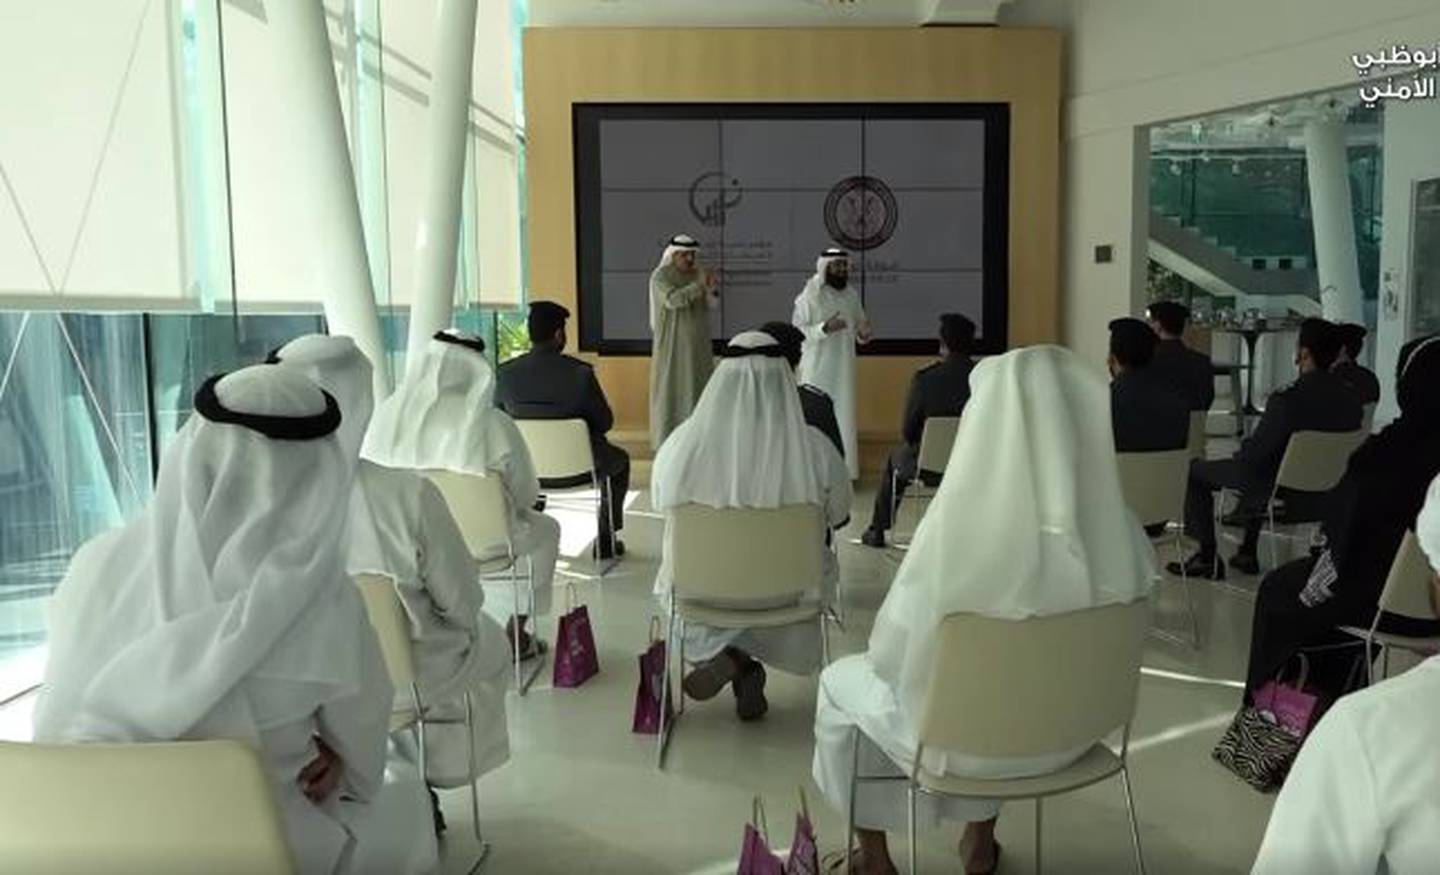 Abu Dhabi Police said the retraining programme was now open to people with hearing difficulties and is being offered in co-operation with the Zayed Higher Organisation for People of Determination. Photo: Abu Dhabi Police